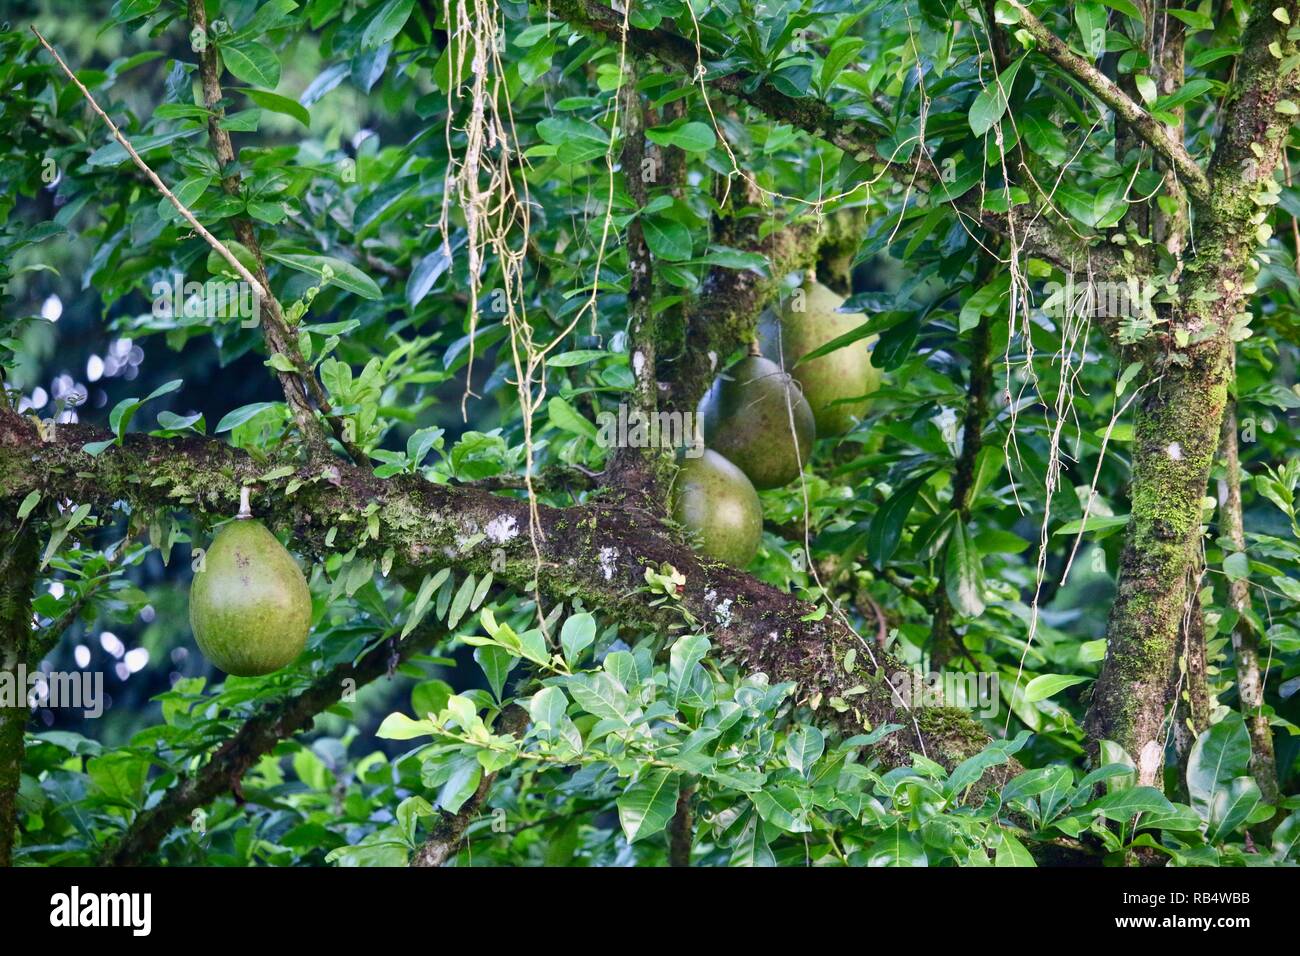 A Central American tree with a hard, round gourd like fruit growing on the trunk Stock Photo